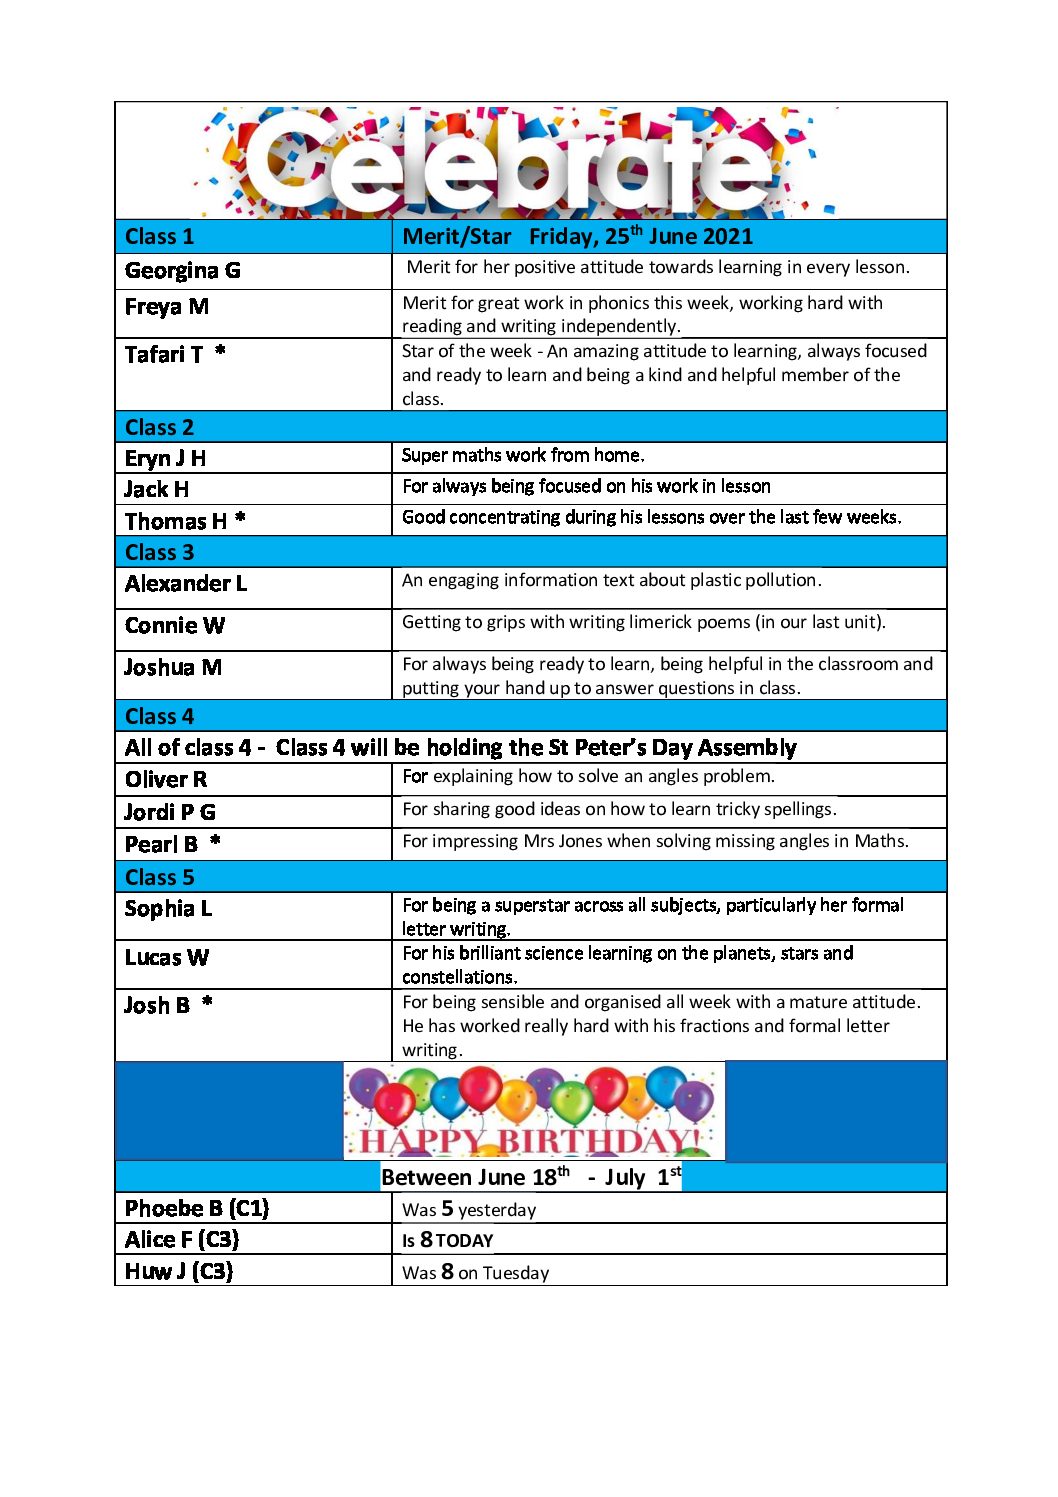 Celebration Assembly and Birthday Shout out – Friday 25th June 2021